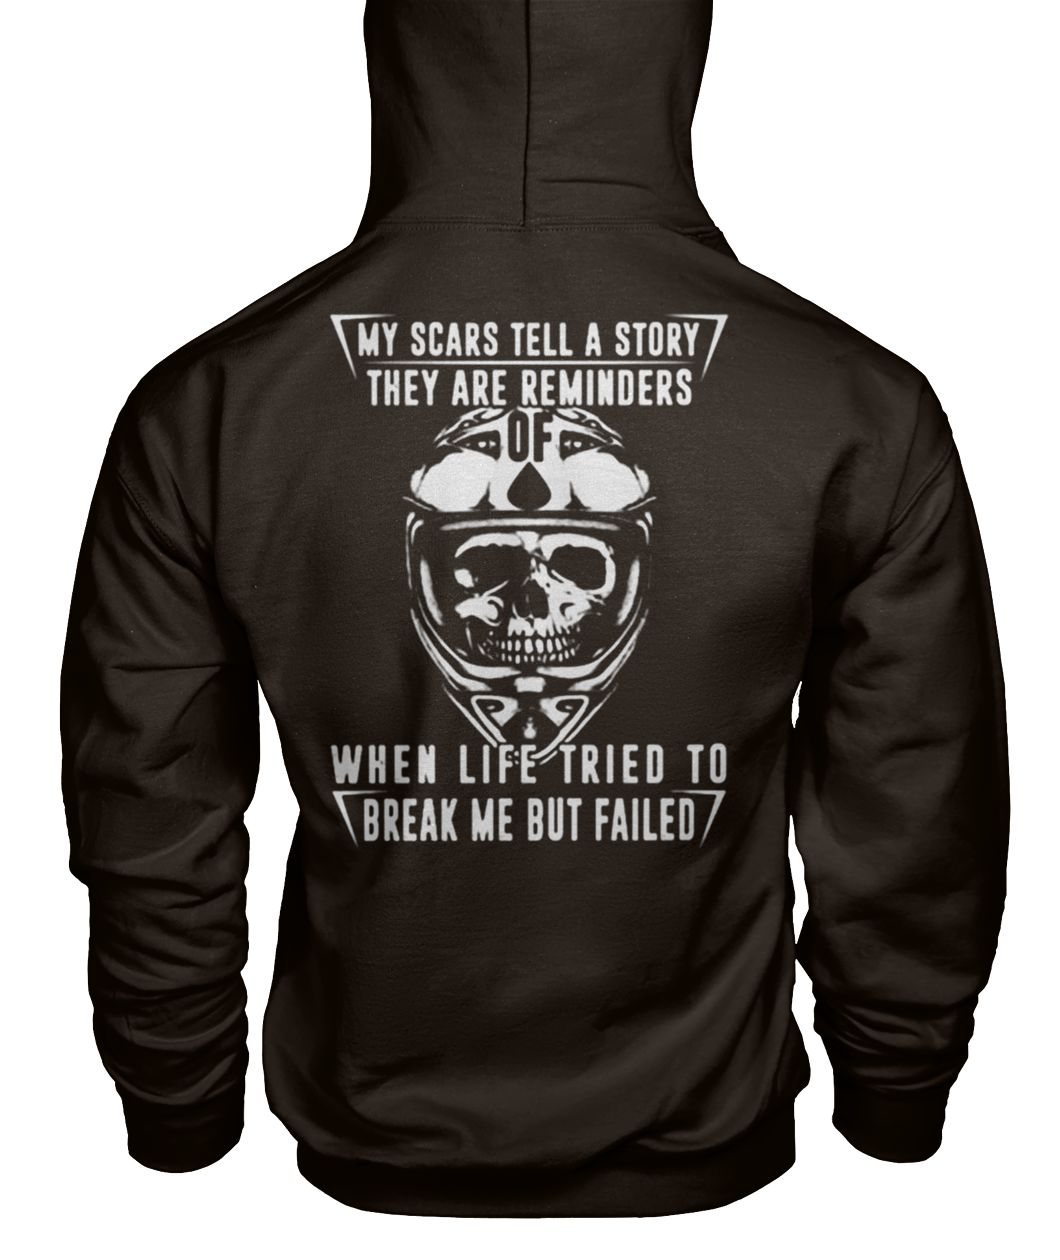 My scars tell a story they are reminders of when life tried to break me but failed gildan hoodie